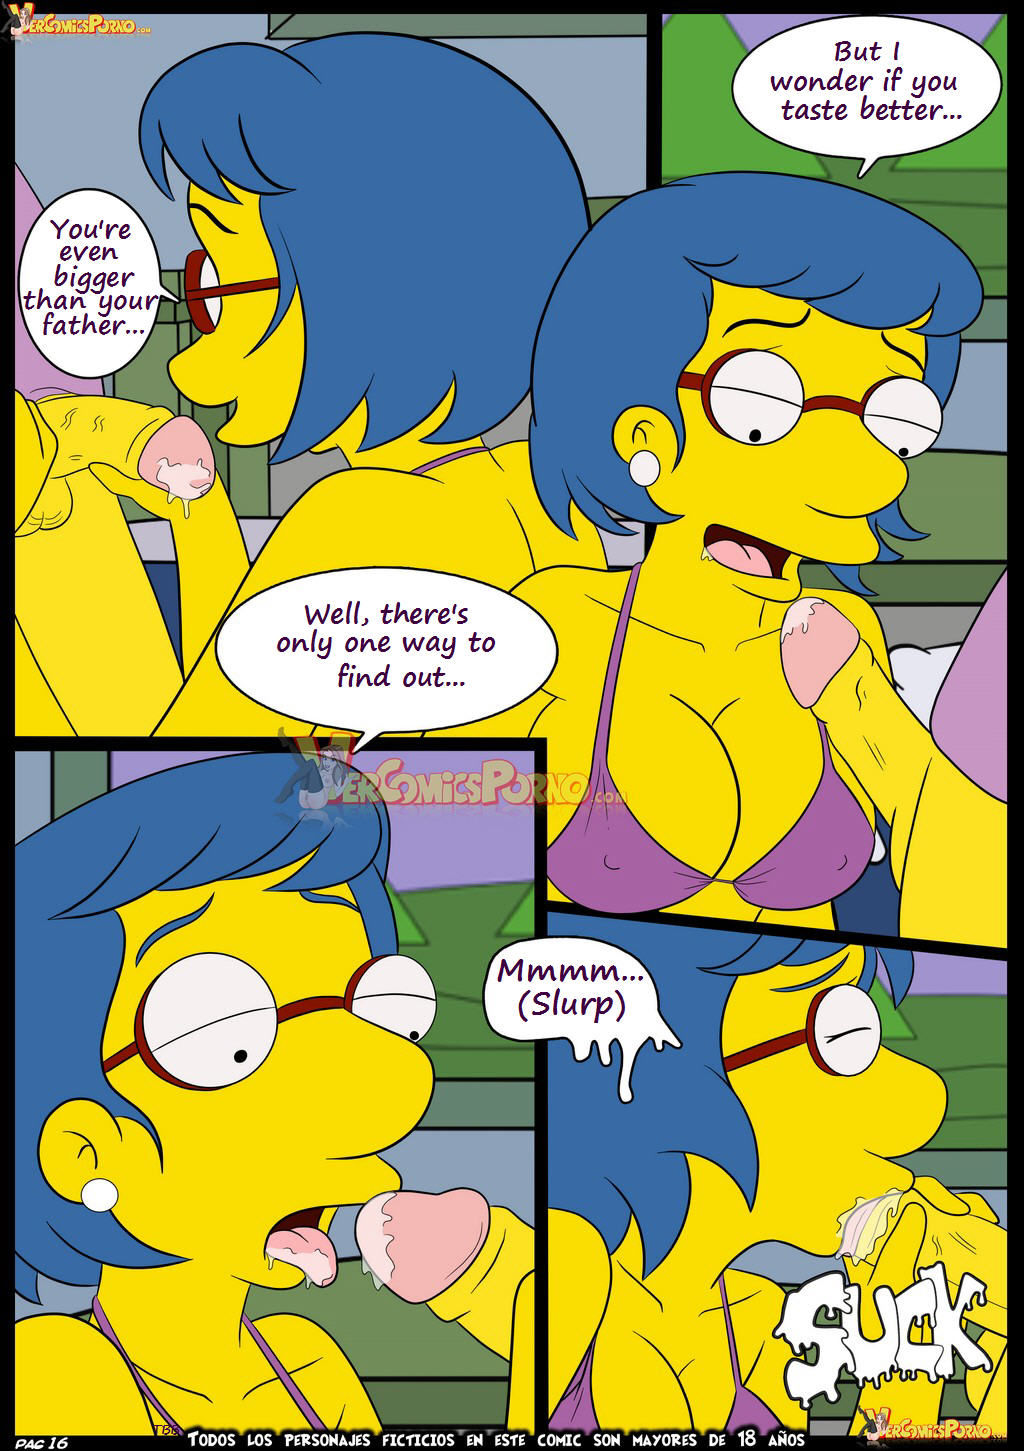 Croc,The Simpsons Learning with Mom-English page 16